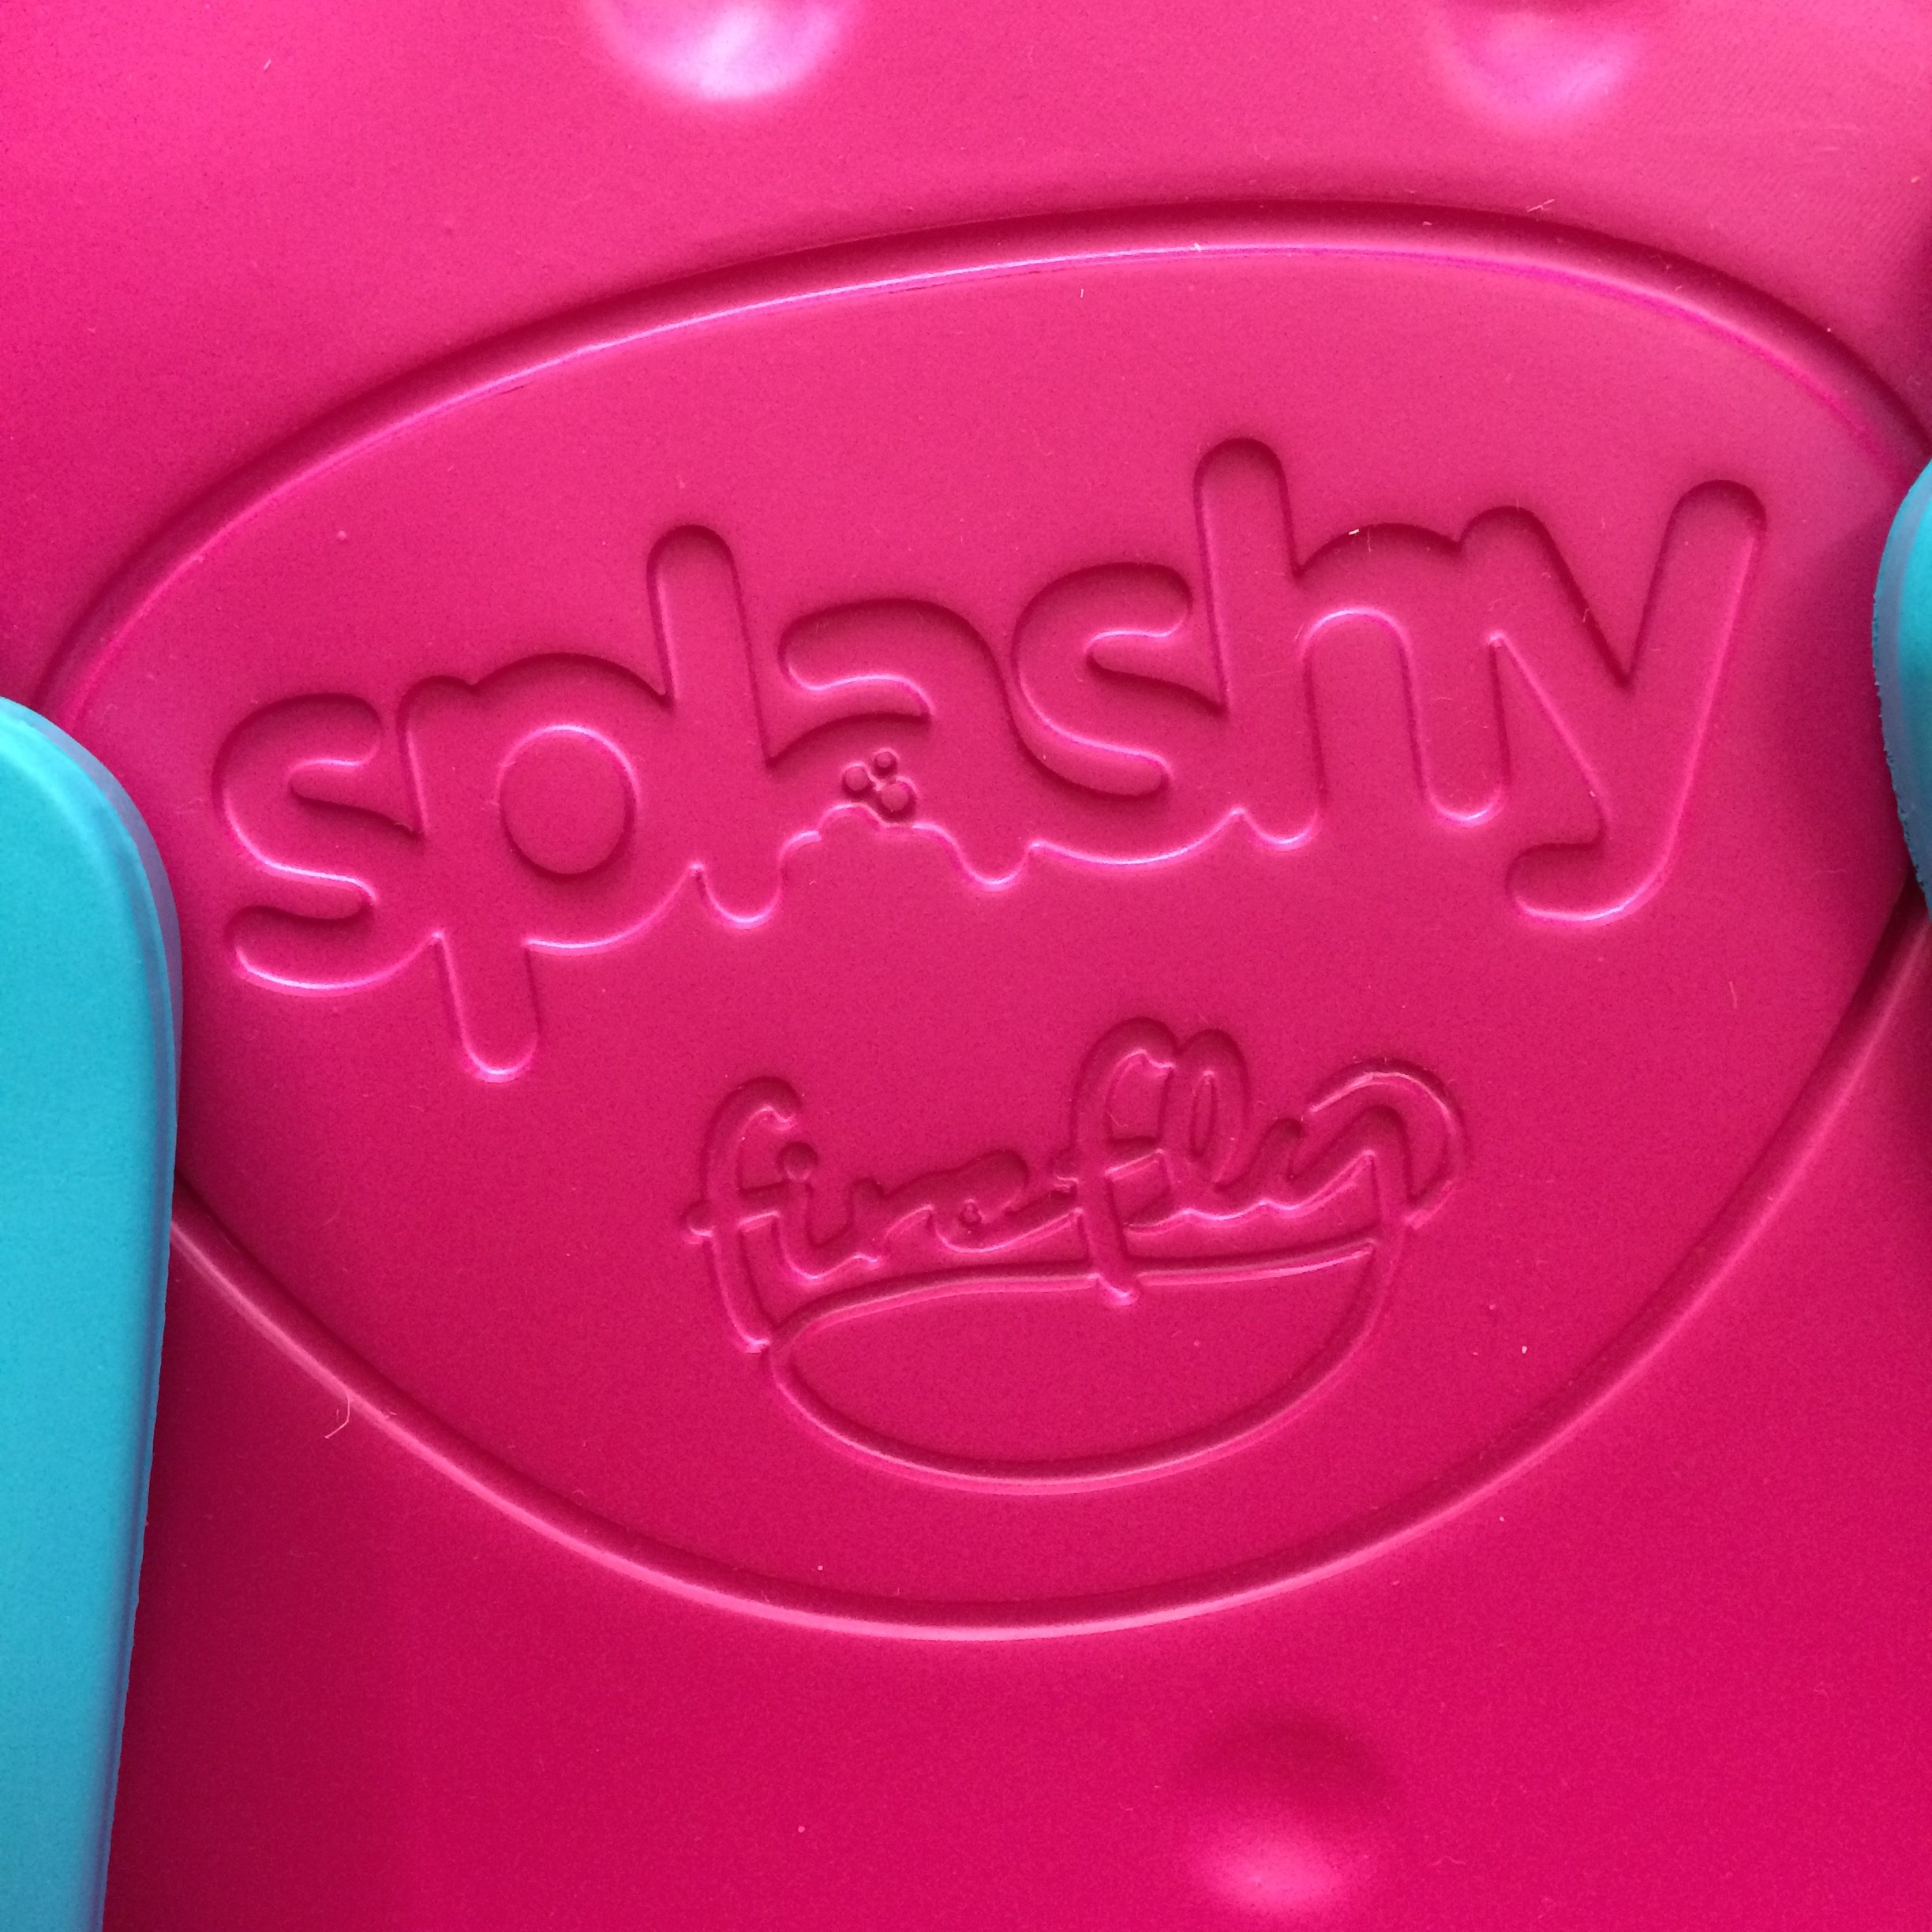 Close up of splashy firefly logo imprinted in the seat back